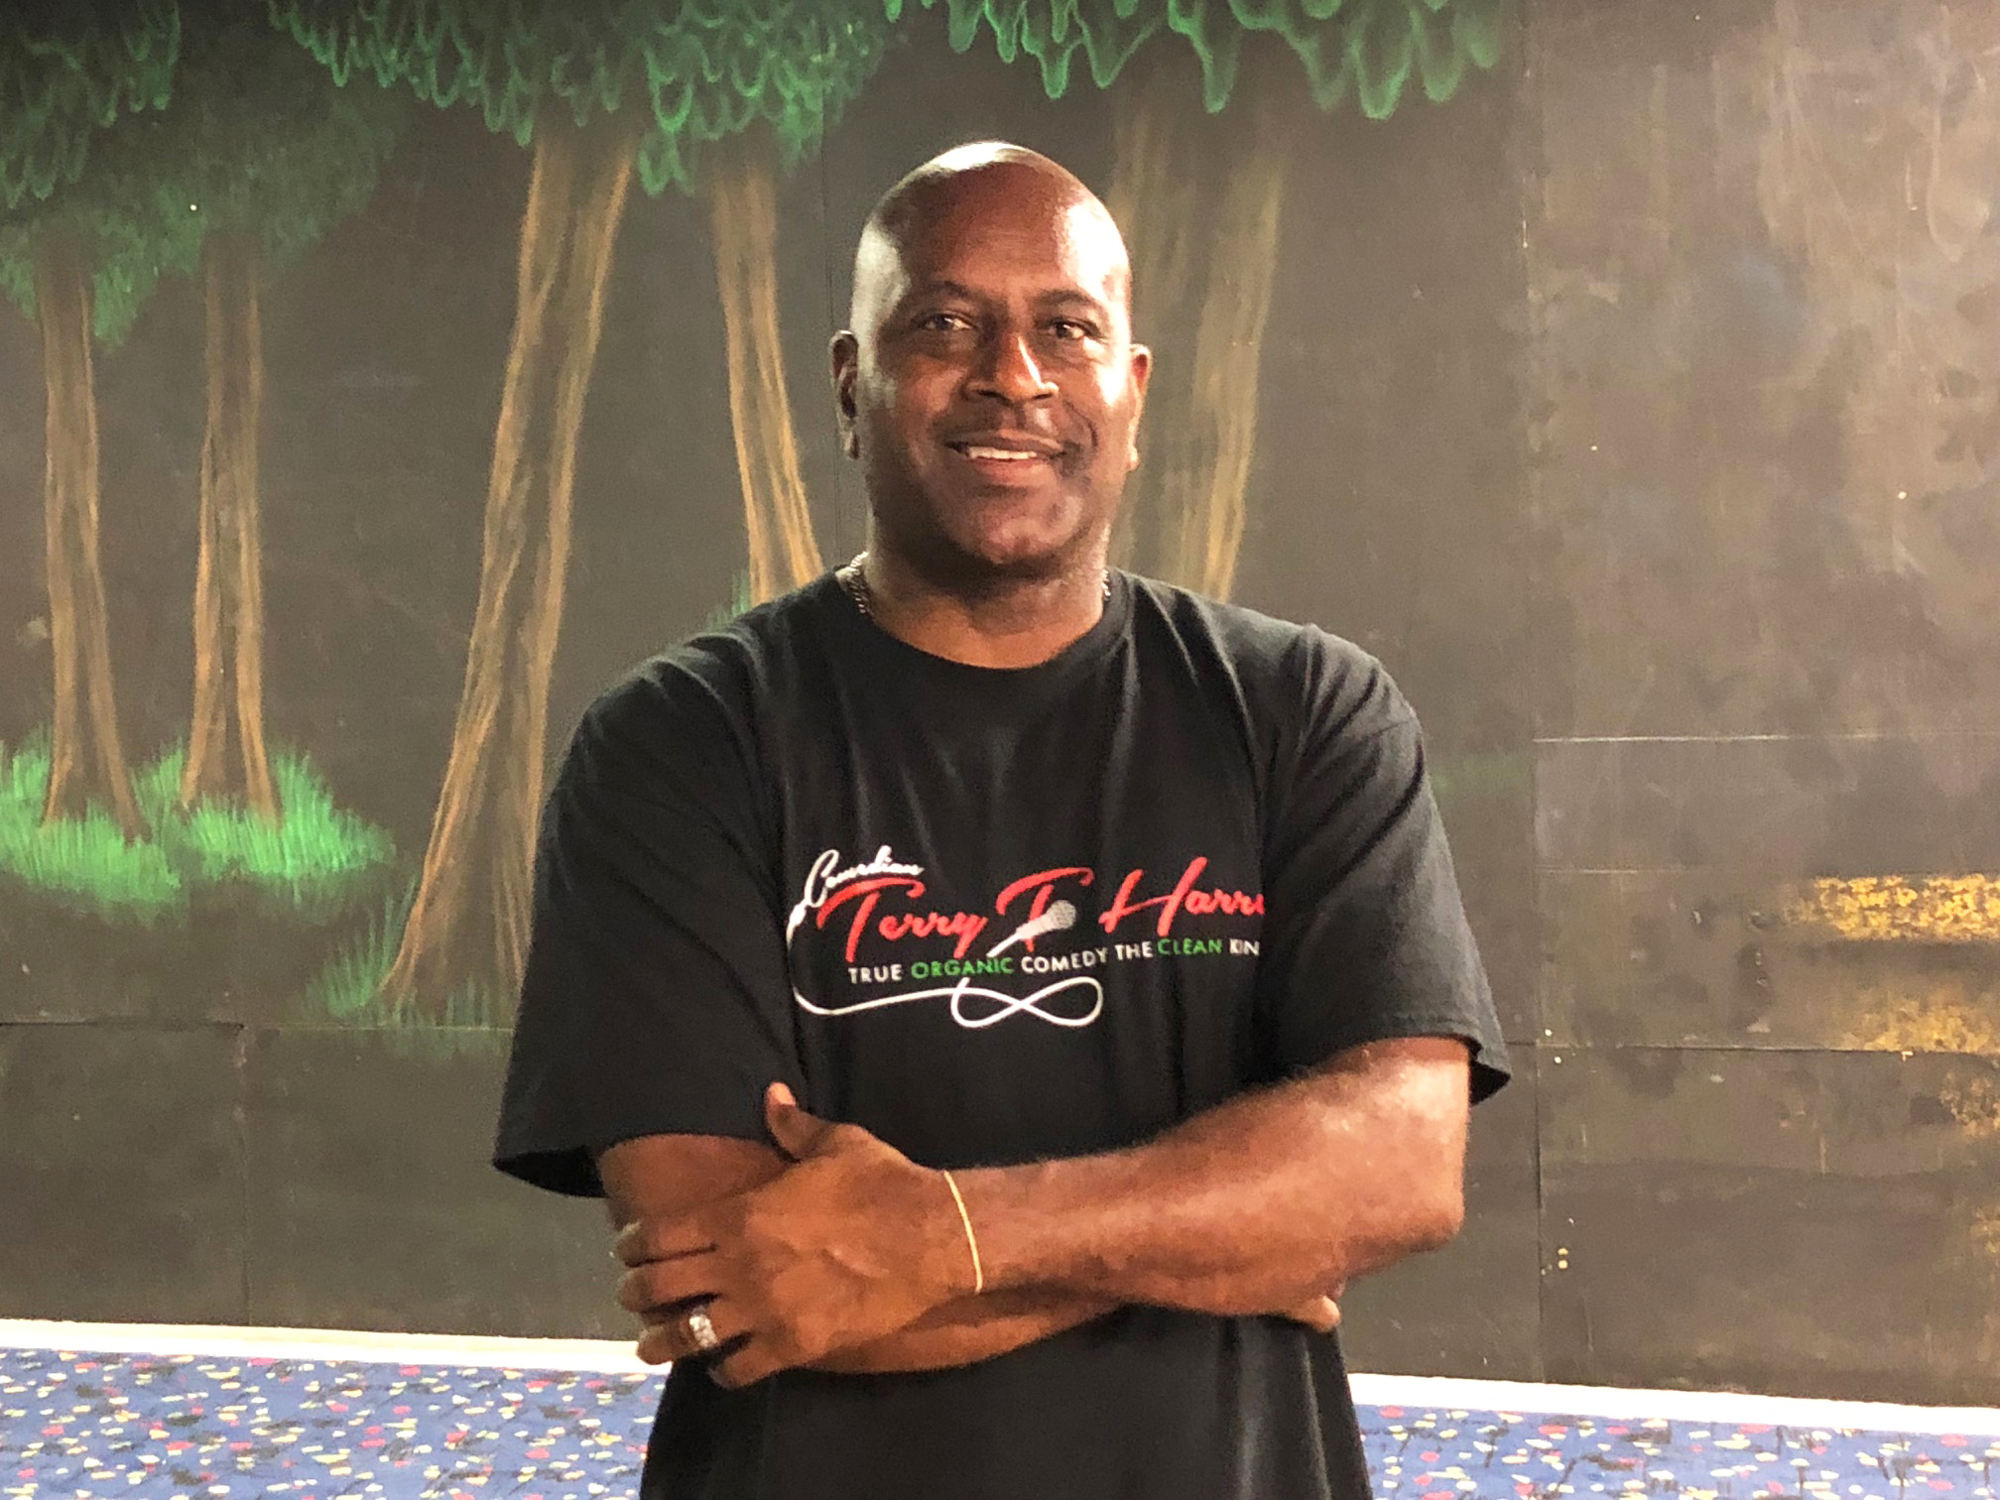 “My story is to give back to the community that has given to me so much and to provide fun inspiration and hope in the lives of our children,” Terry Harris says.